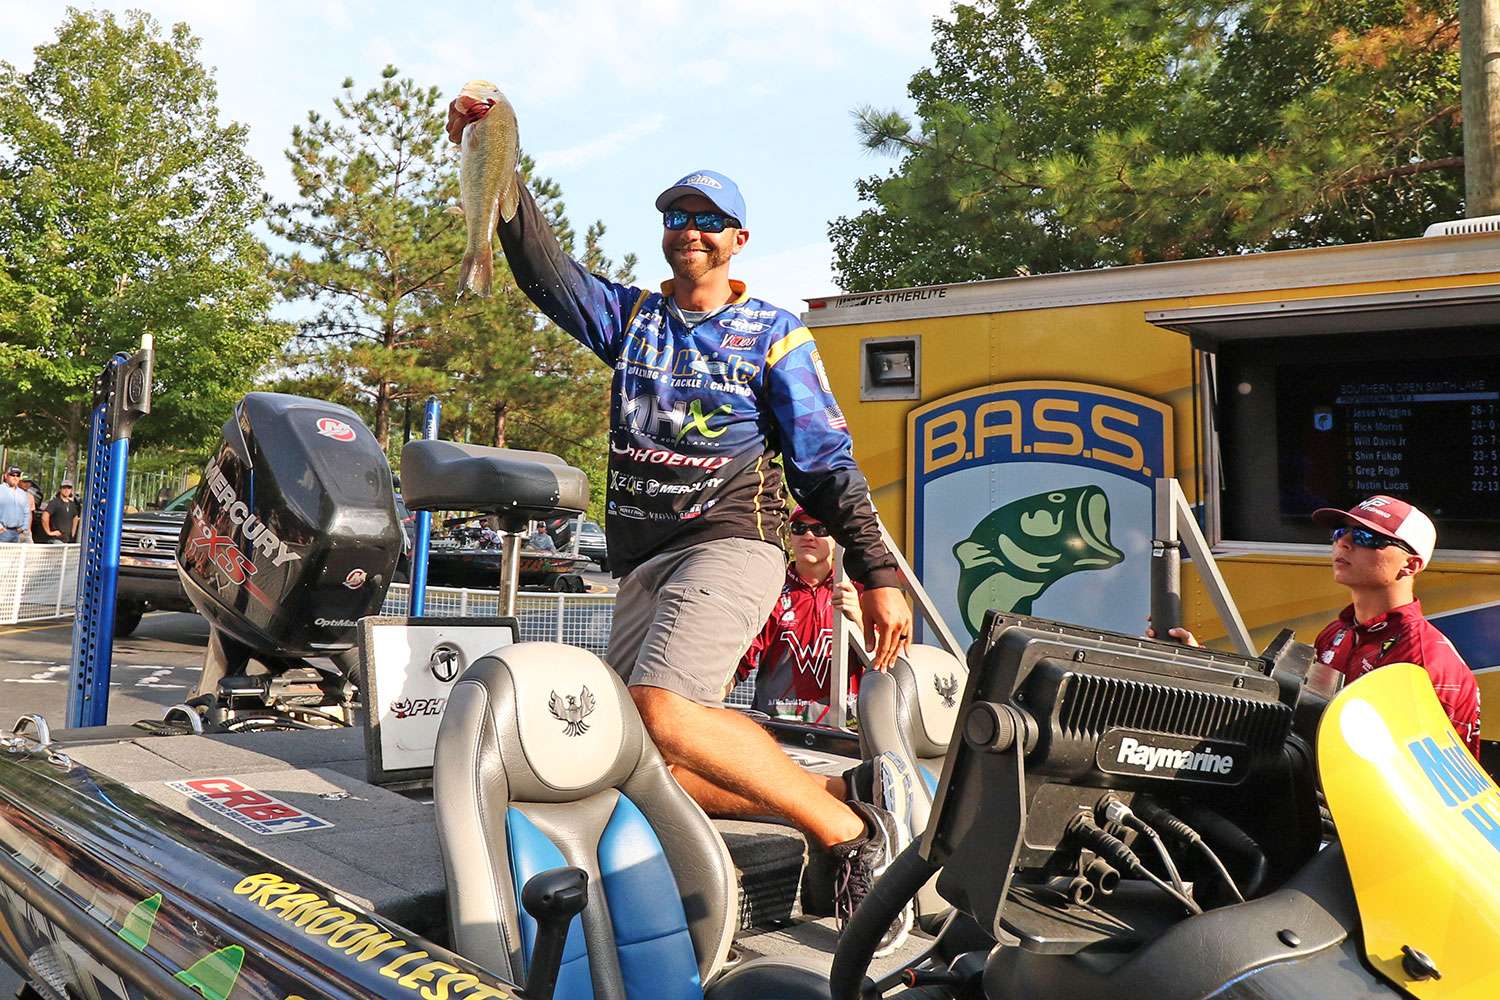 Brandon Lester was first at the scales and made a late charge for the title with this 4-pounder. 